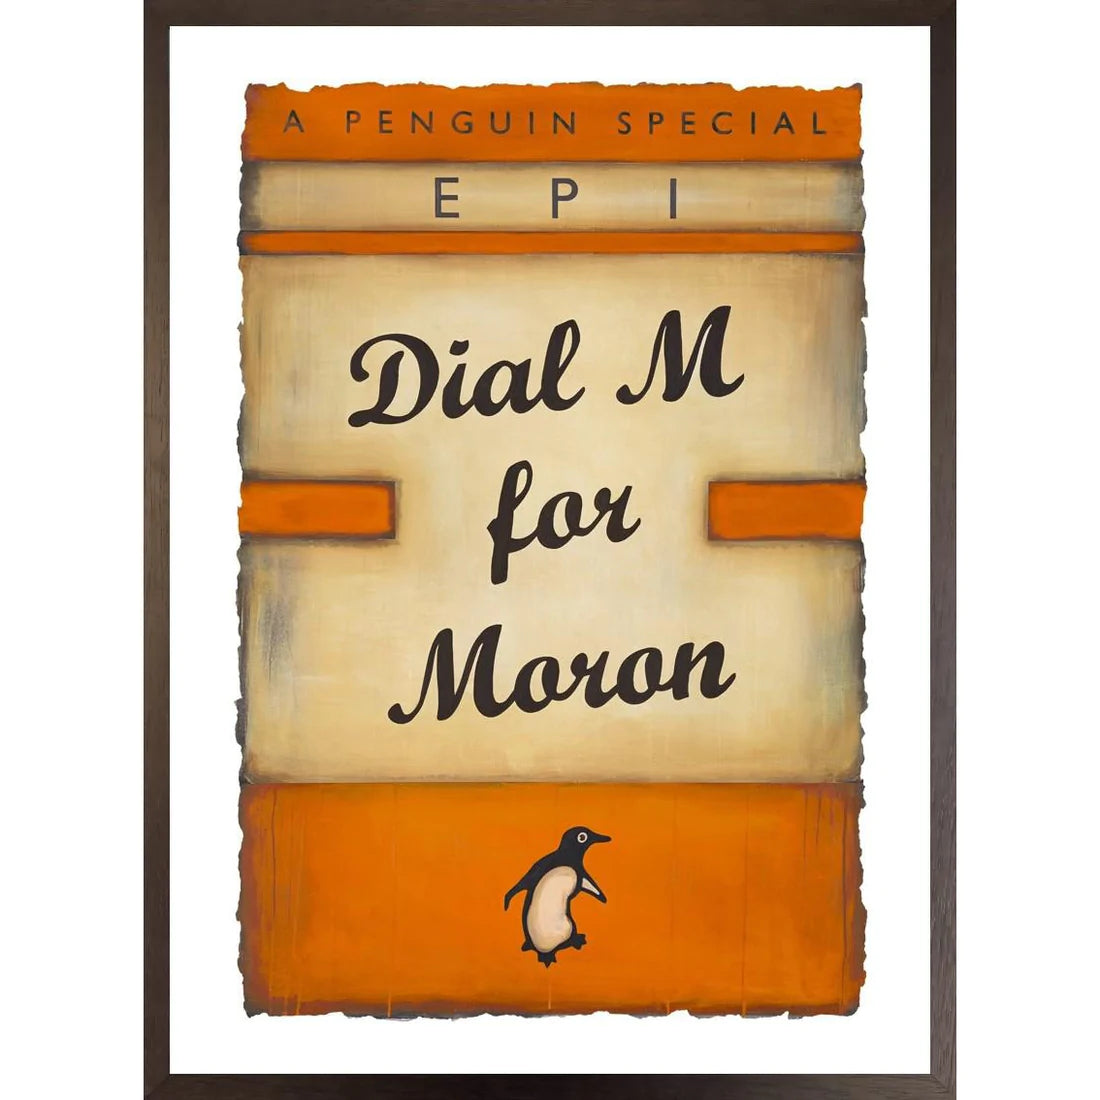 Orange Epi print saying Dial M For Moron in the style of a Penguin book cover